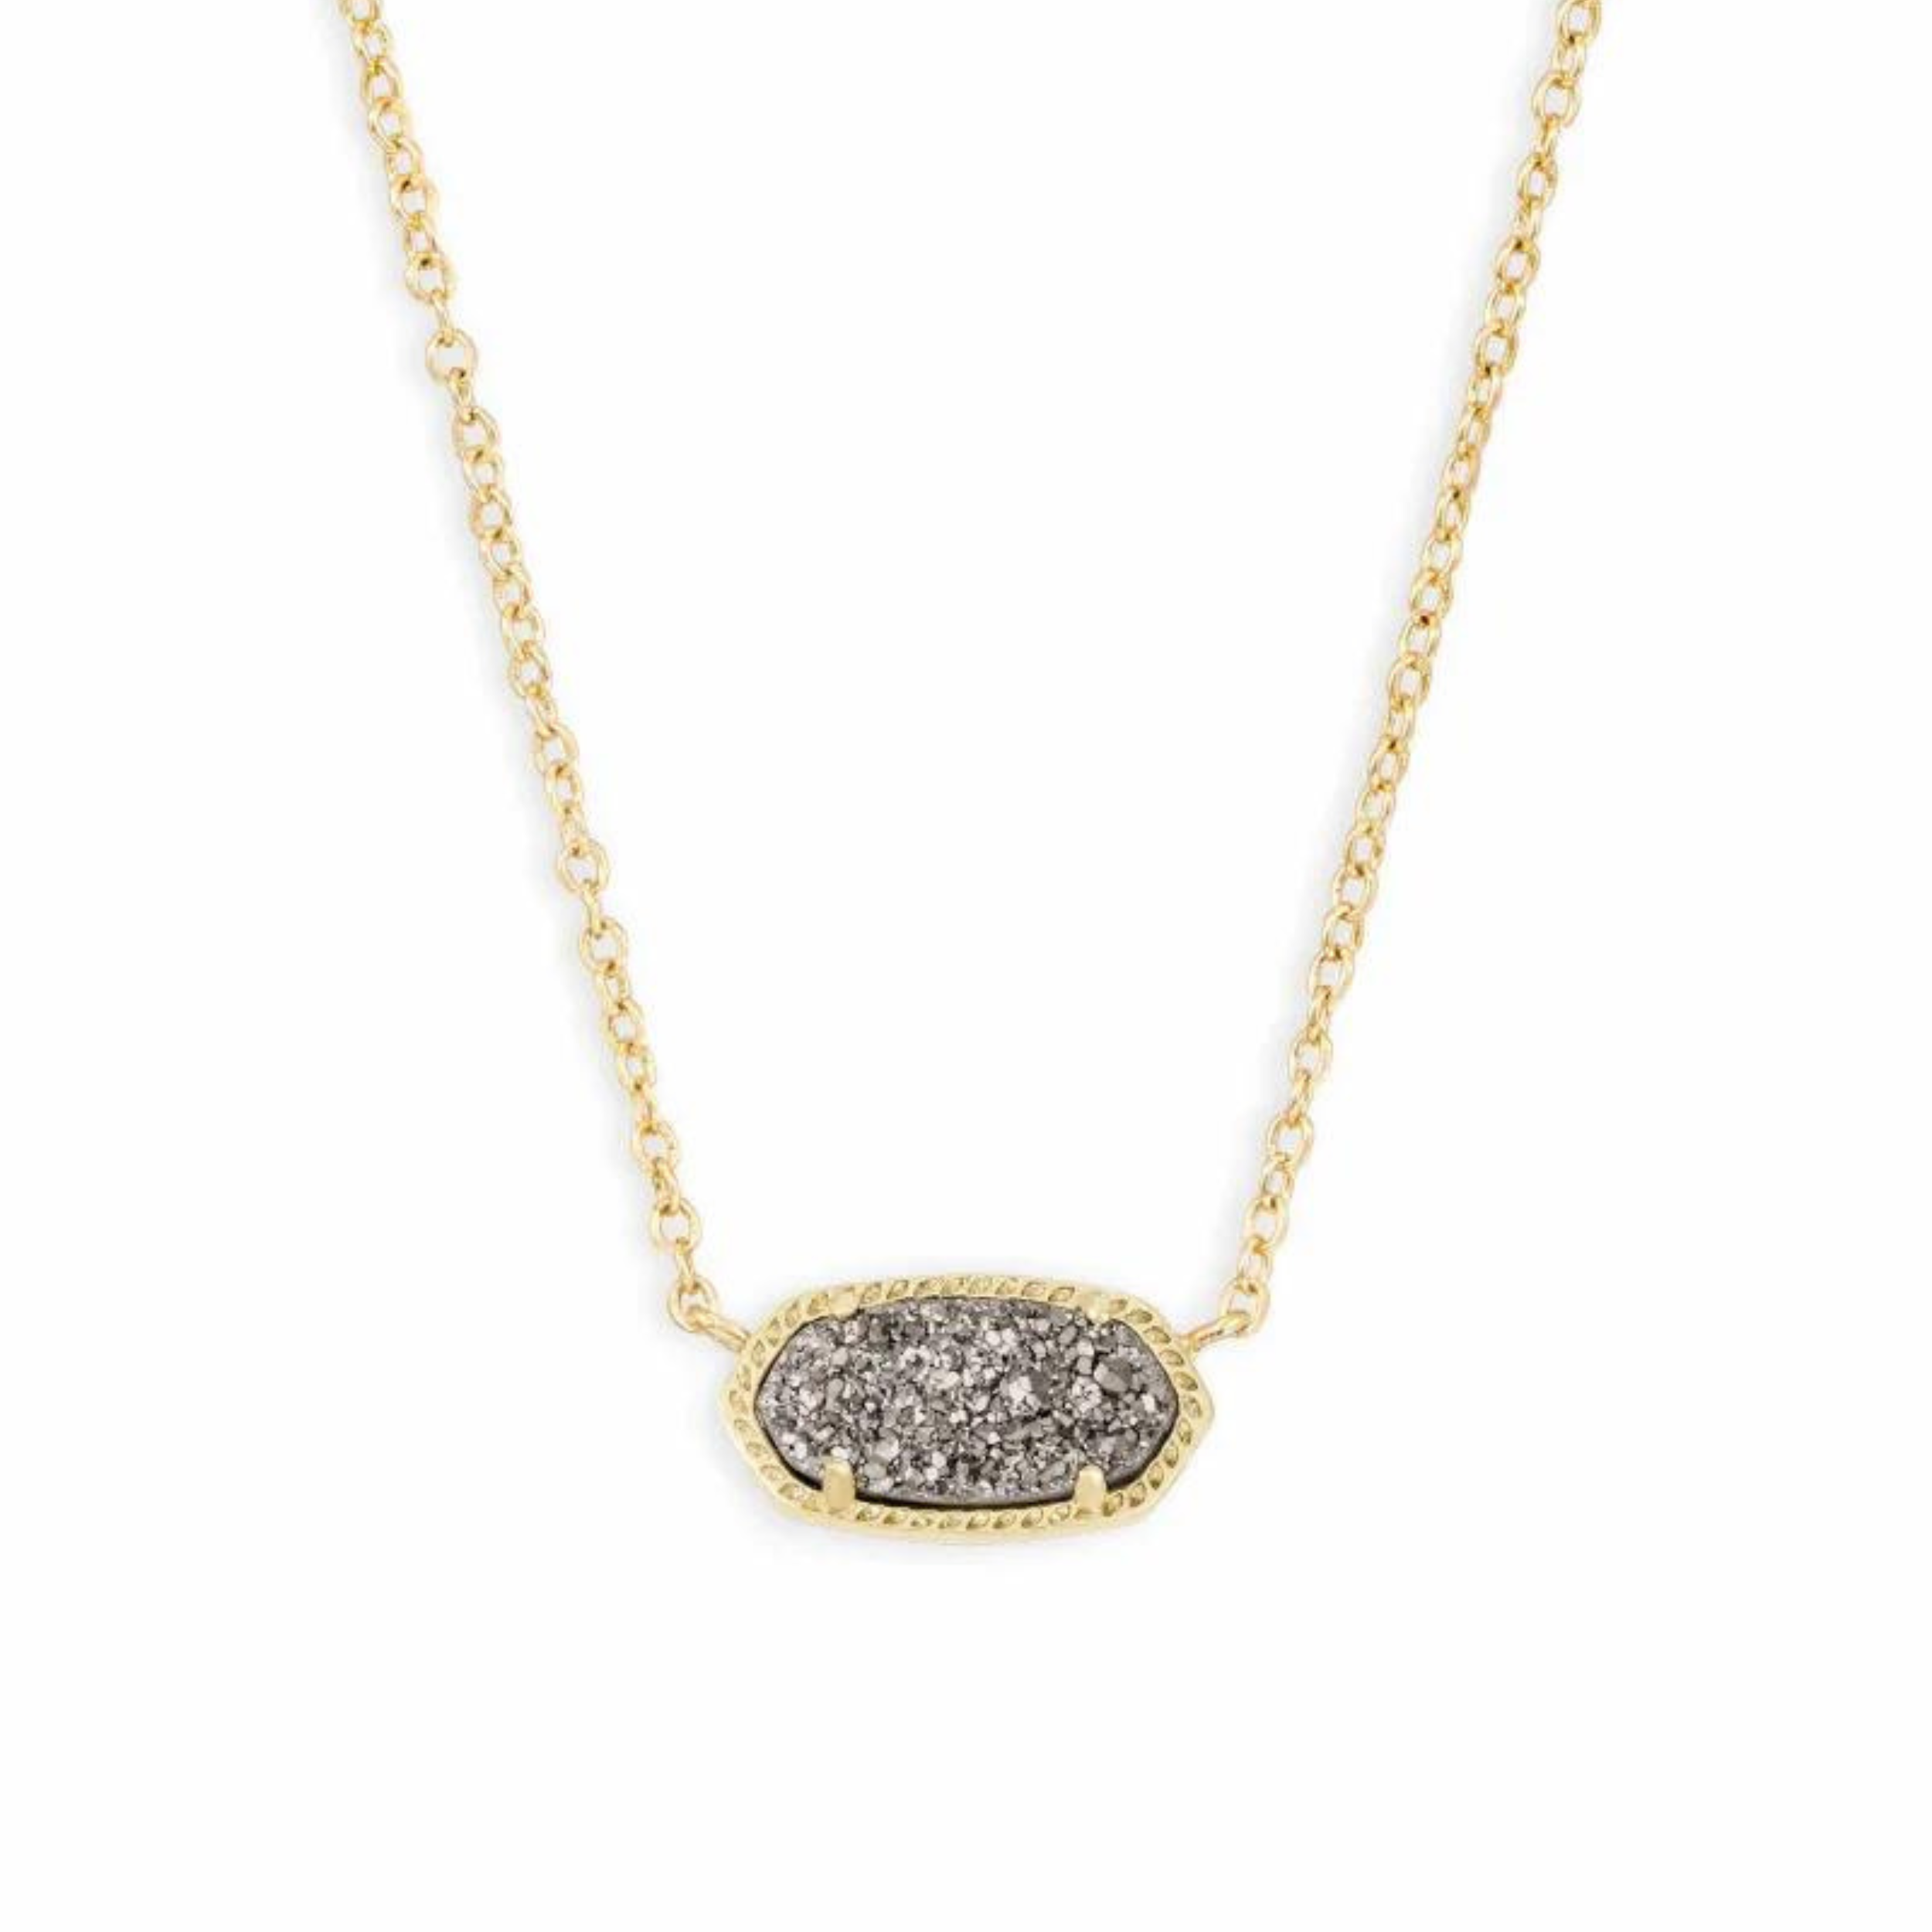 Gold necklace with platinum drusy pendant, pictured on a white background.